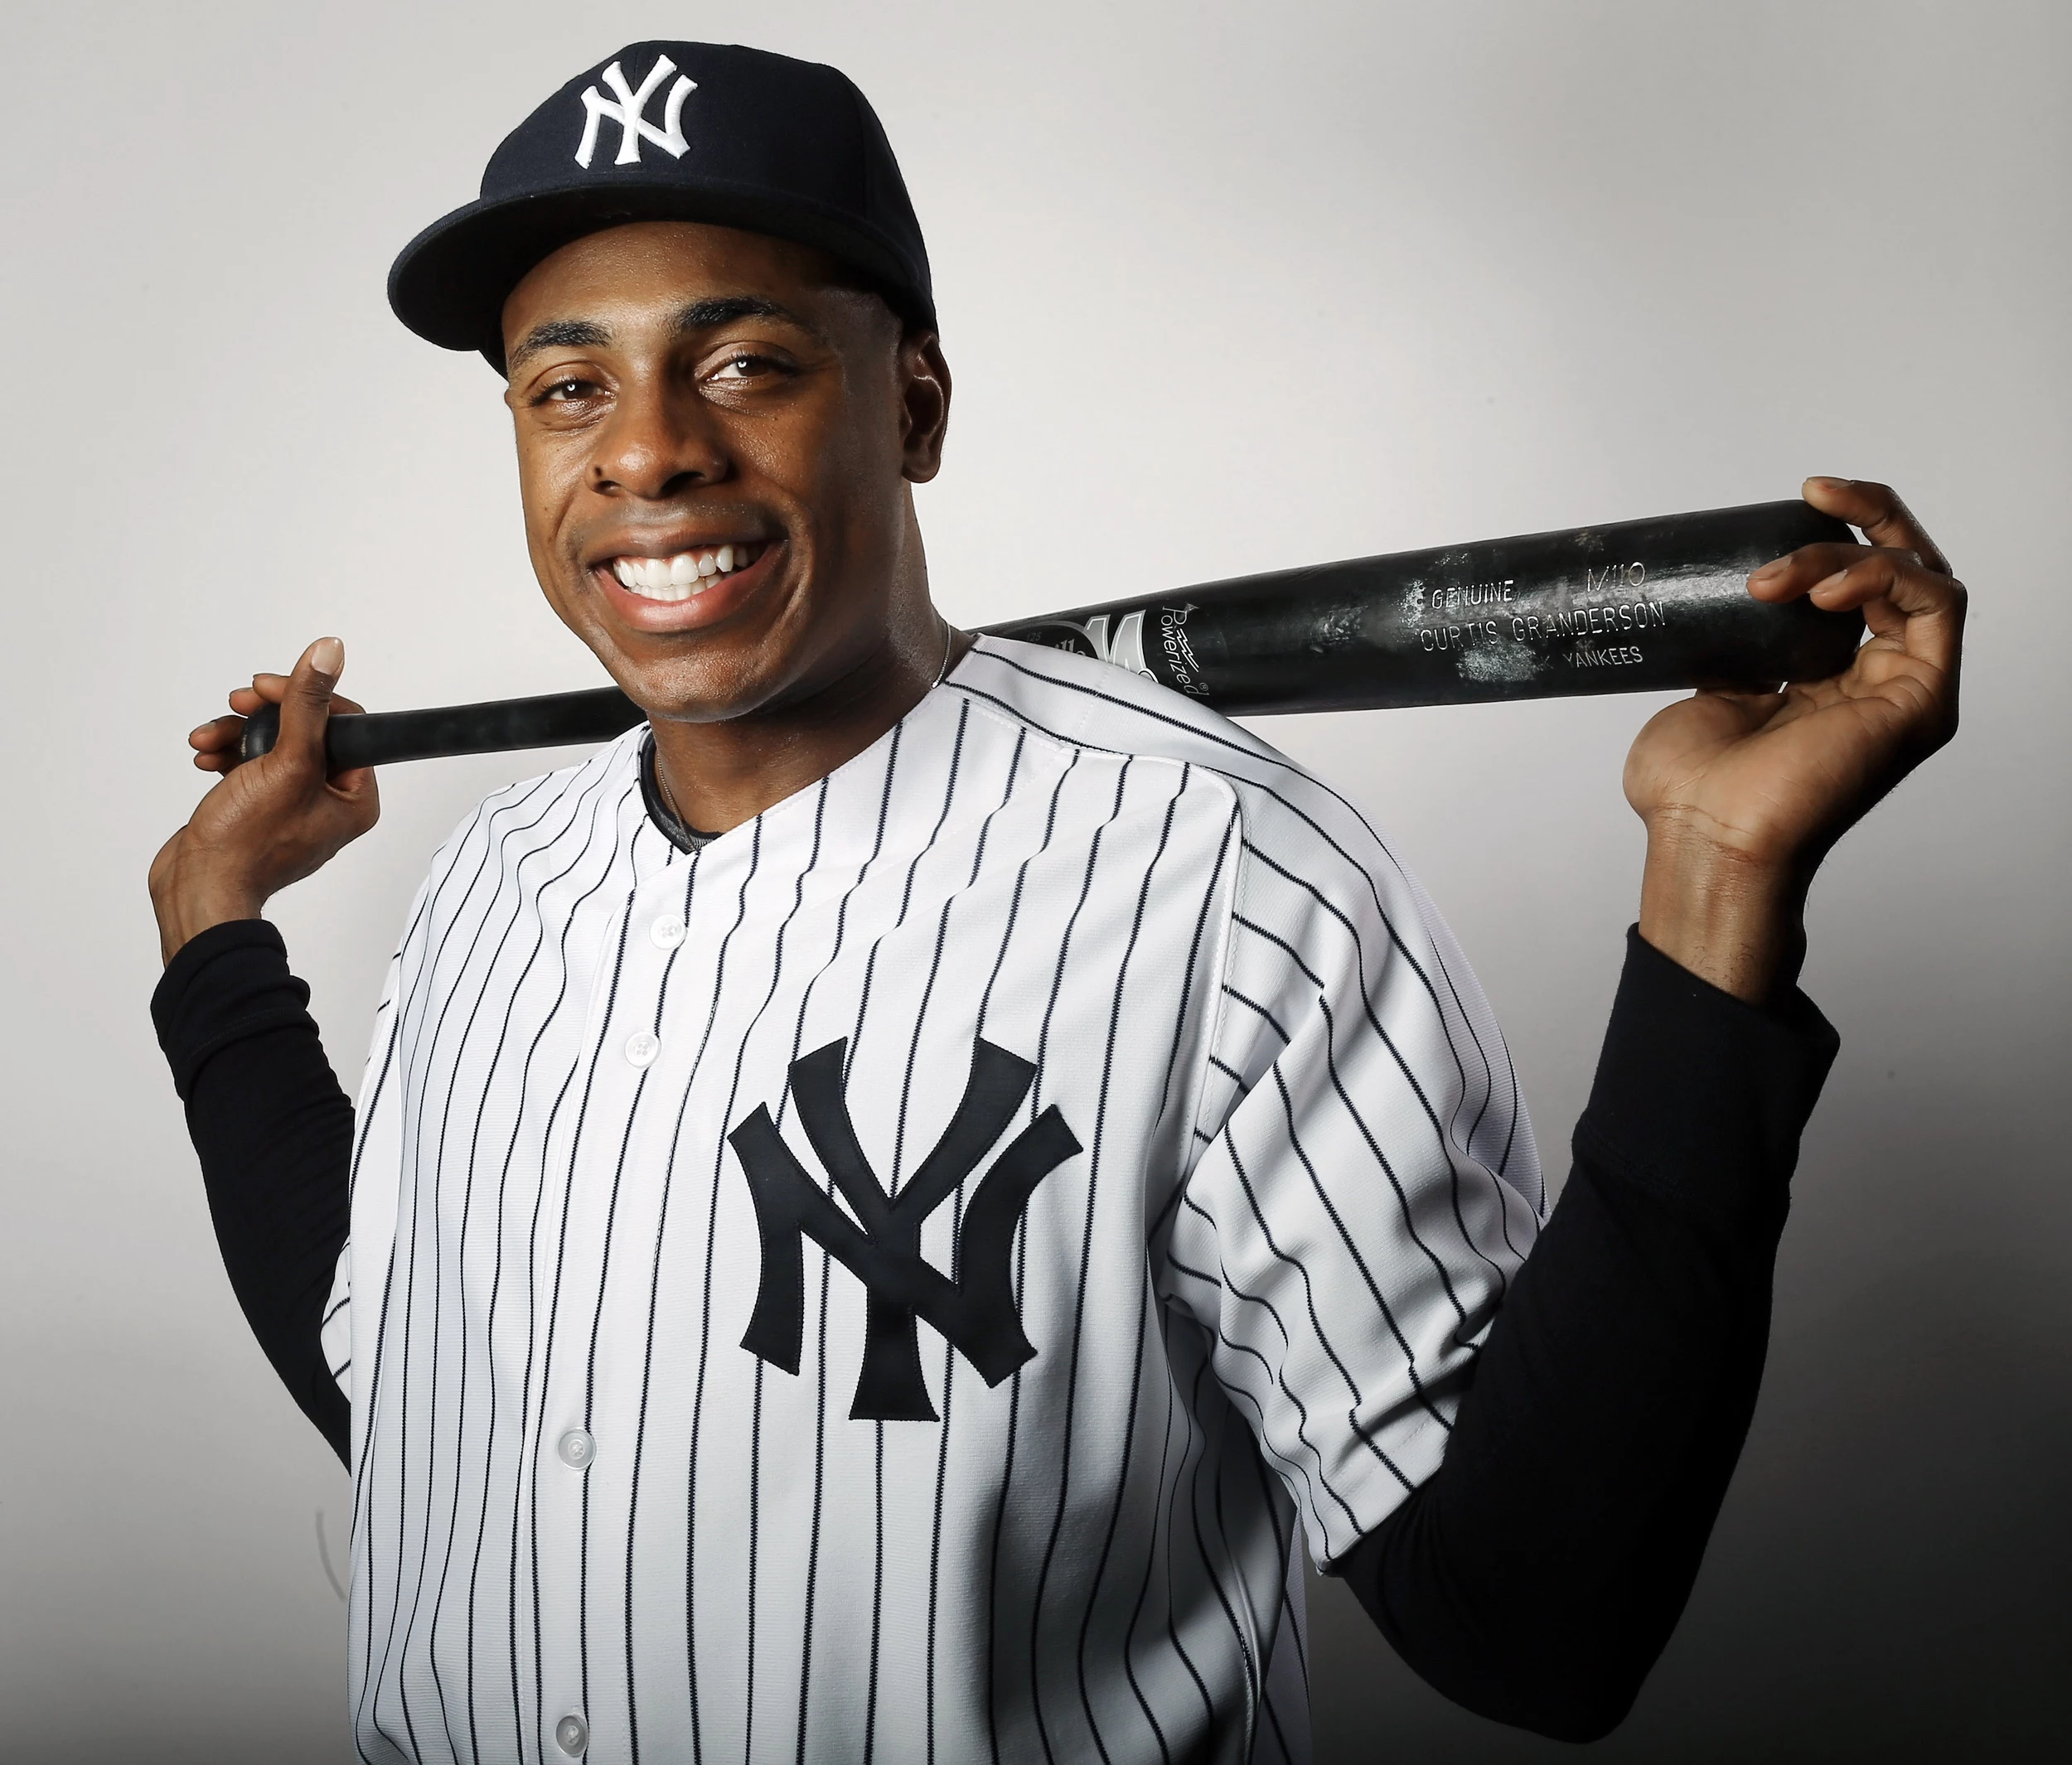 Bradley: Yankees' Curtis Granderson is dialed in at the plate like